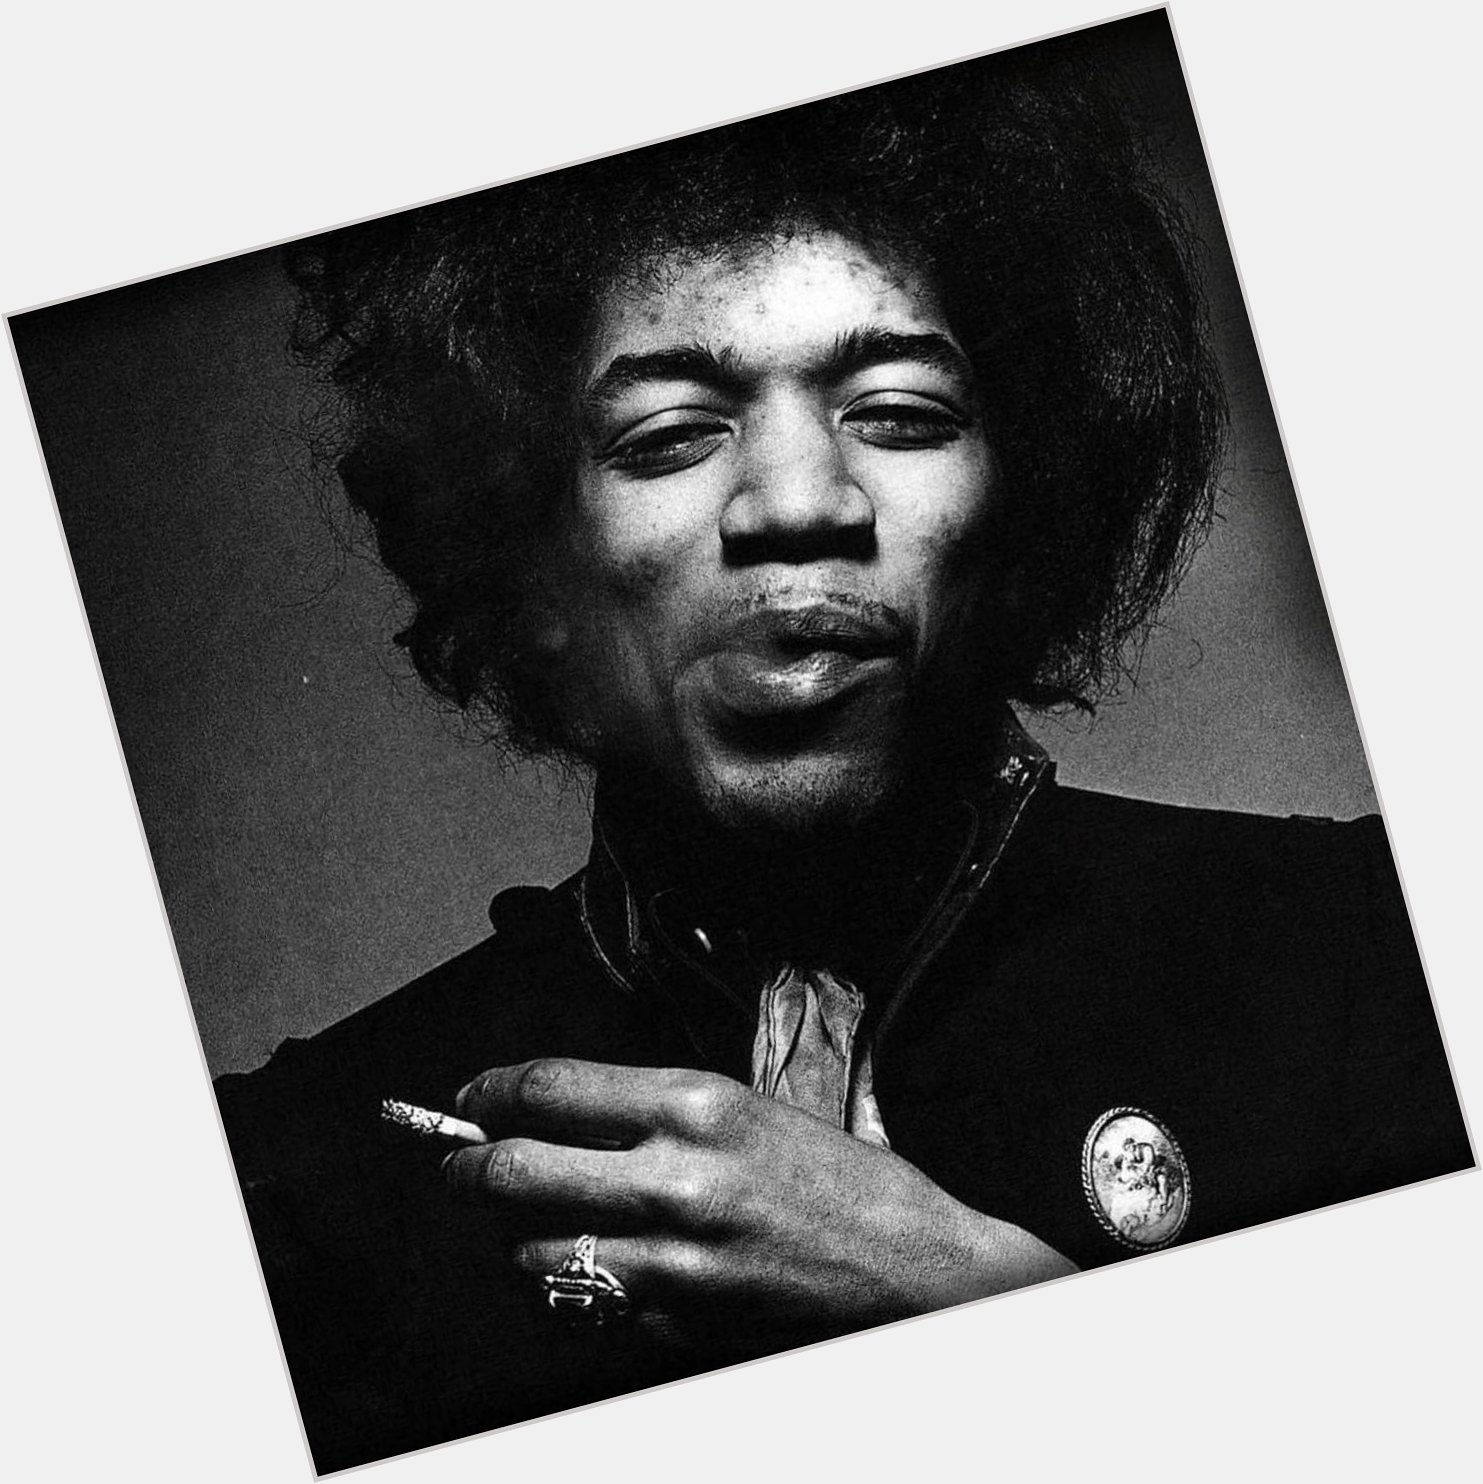 Happy birthday to Jimi Hendrix, one of the greatest guitarists ever! He d be 70 today if it weren t for an overdose. 